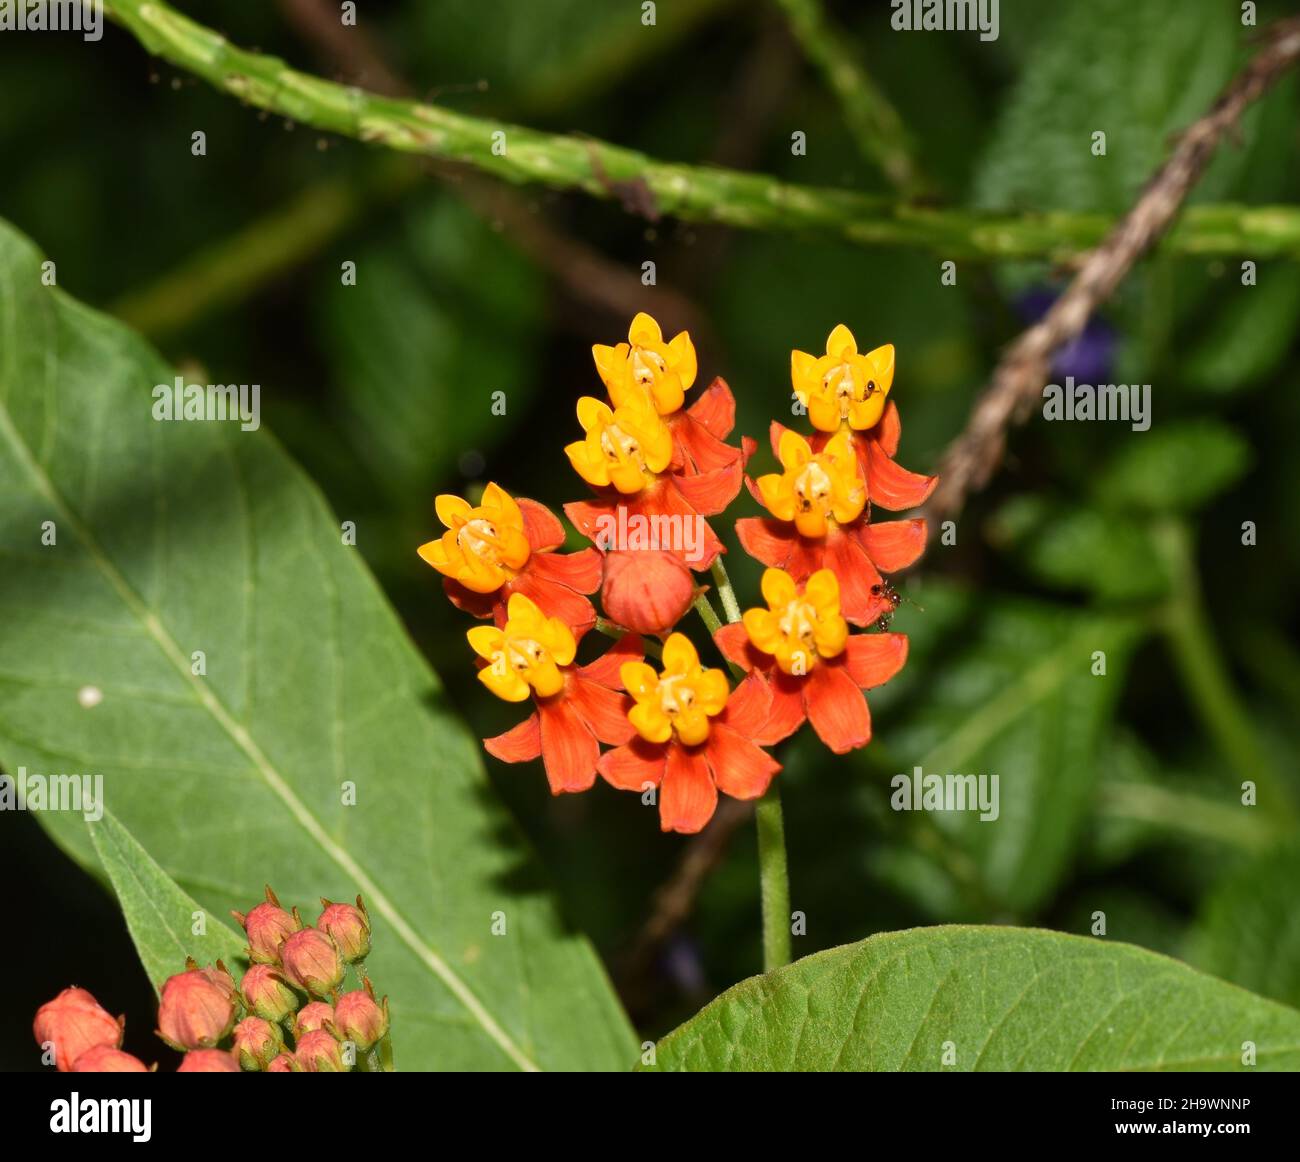 Milkweed flower scientifically known as Asclepias curassavica in a garden in Trinidad. Stock Photo